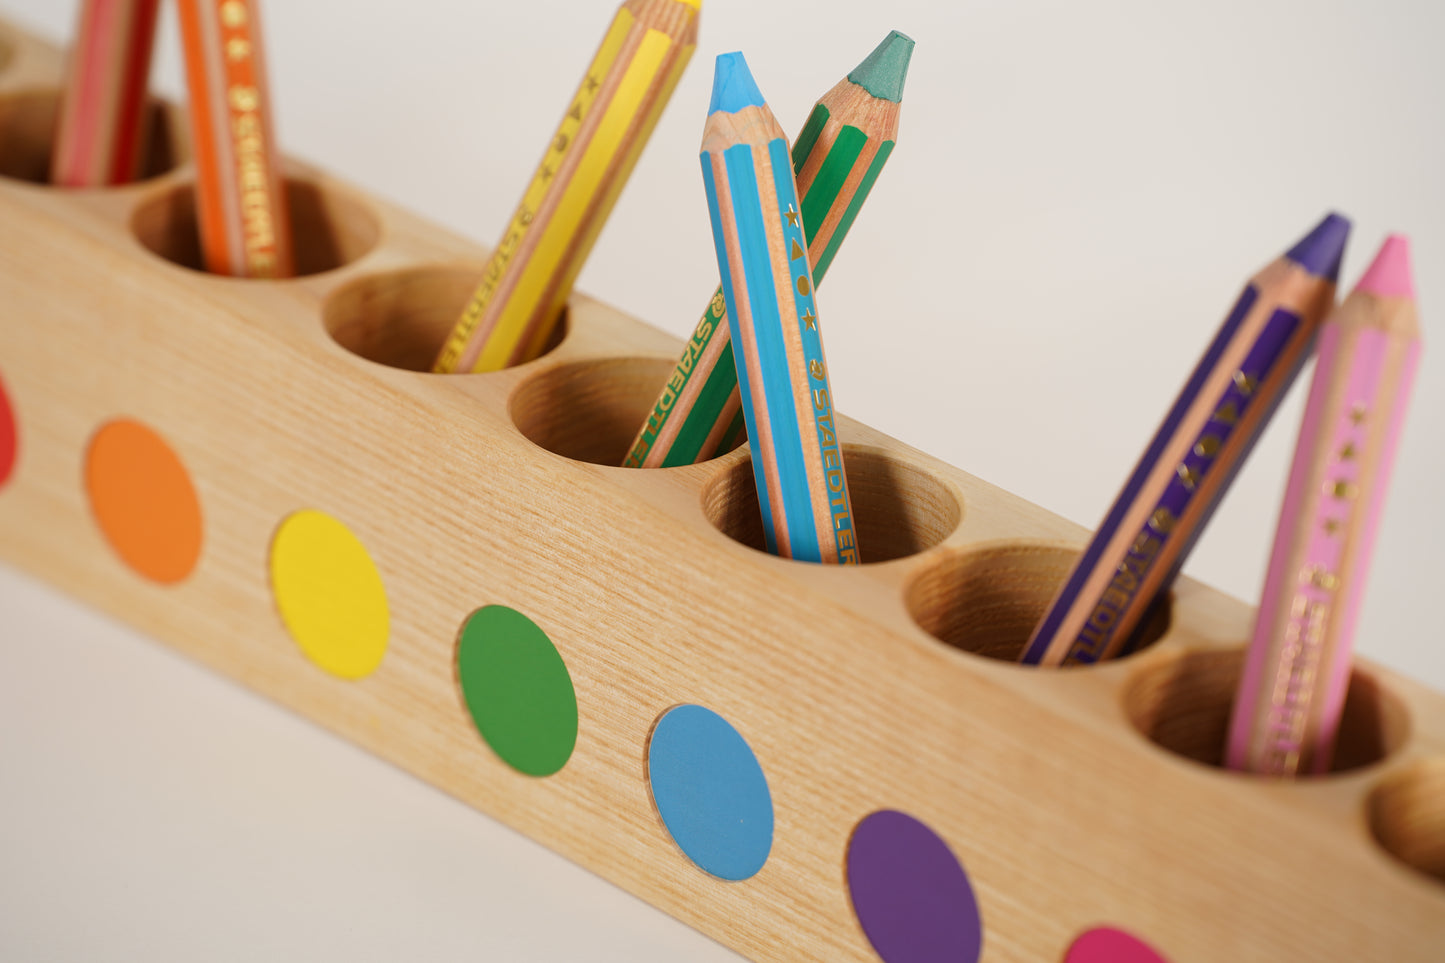 Large montessori pencil holder, with staedtler noris pencils for small kids, close-up view